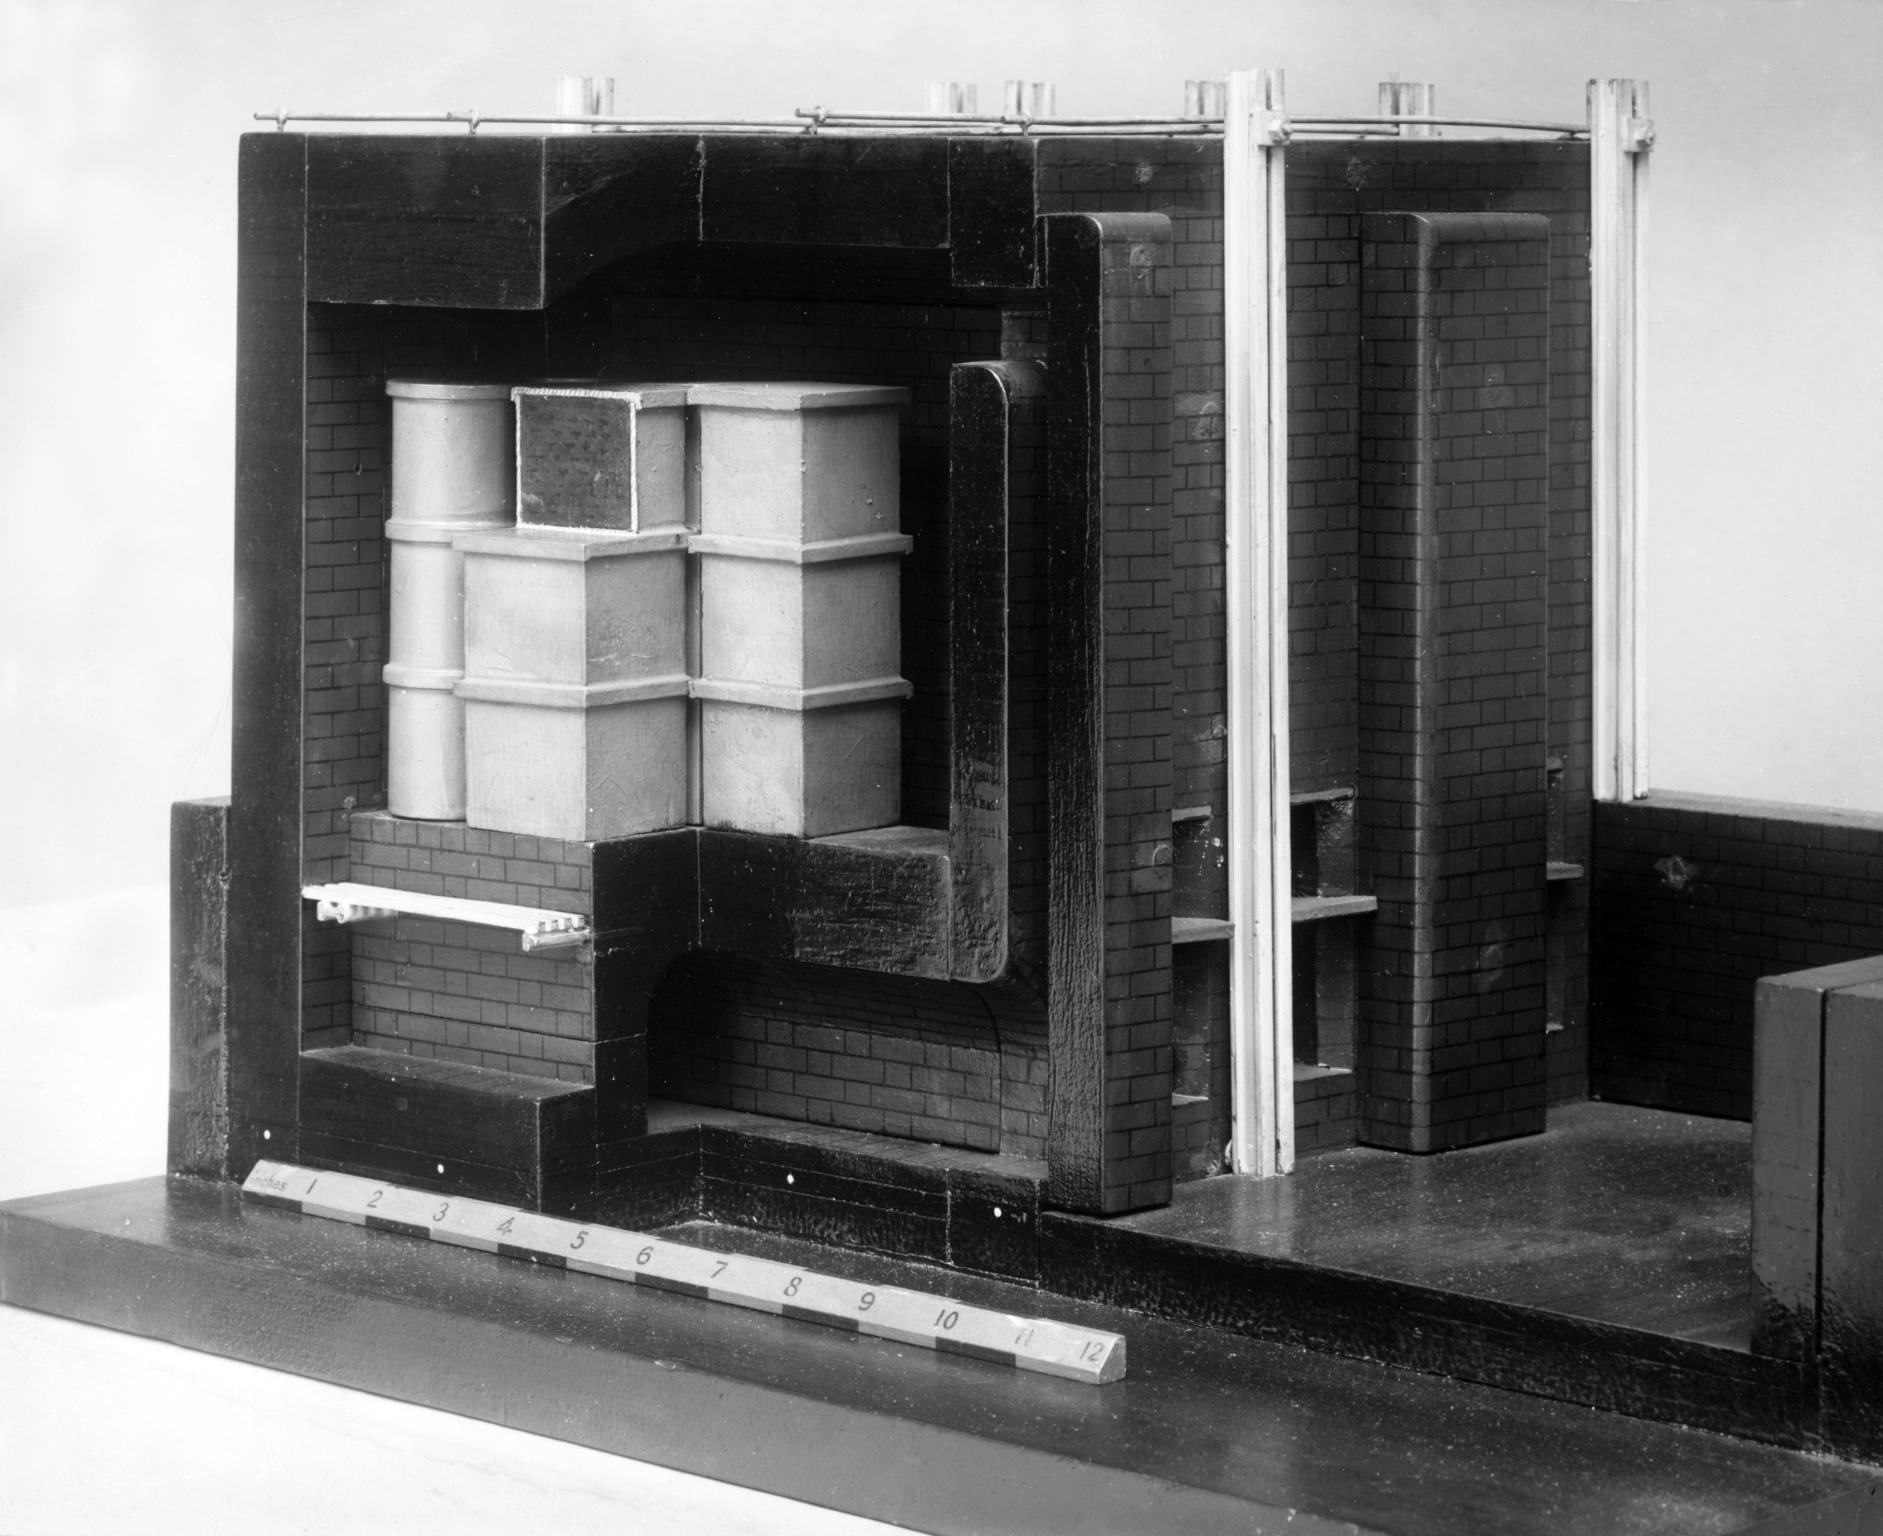 Sectional model of furnace for malleable iron castings